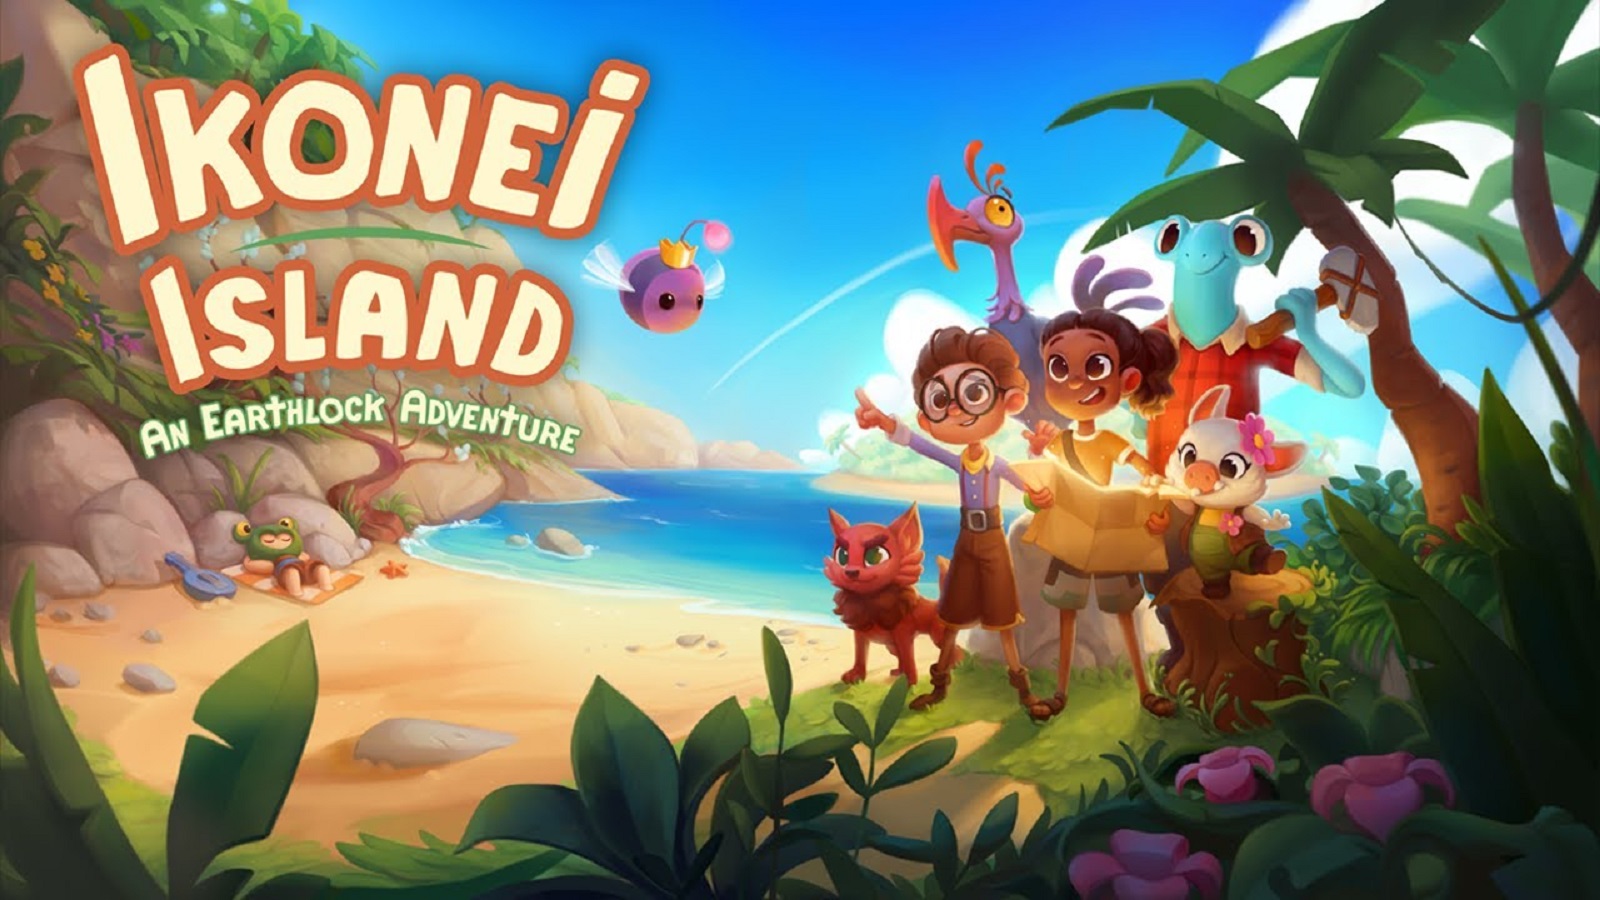 Ikonei Island early access review: A rough but delightful adventure